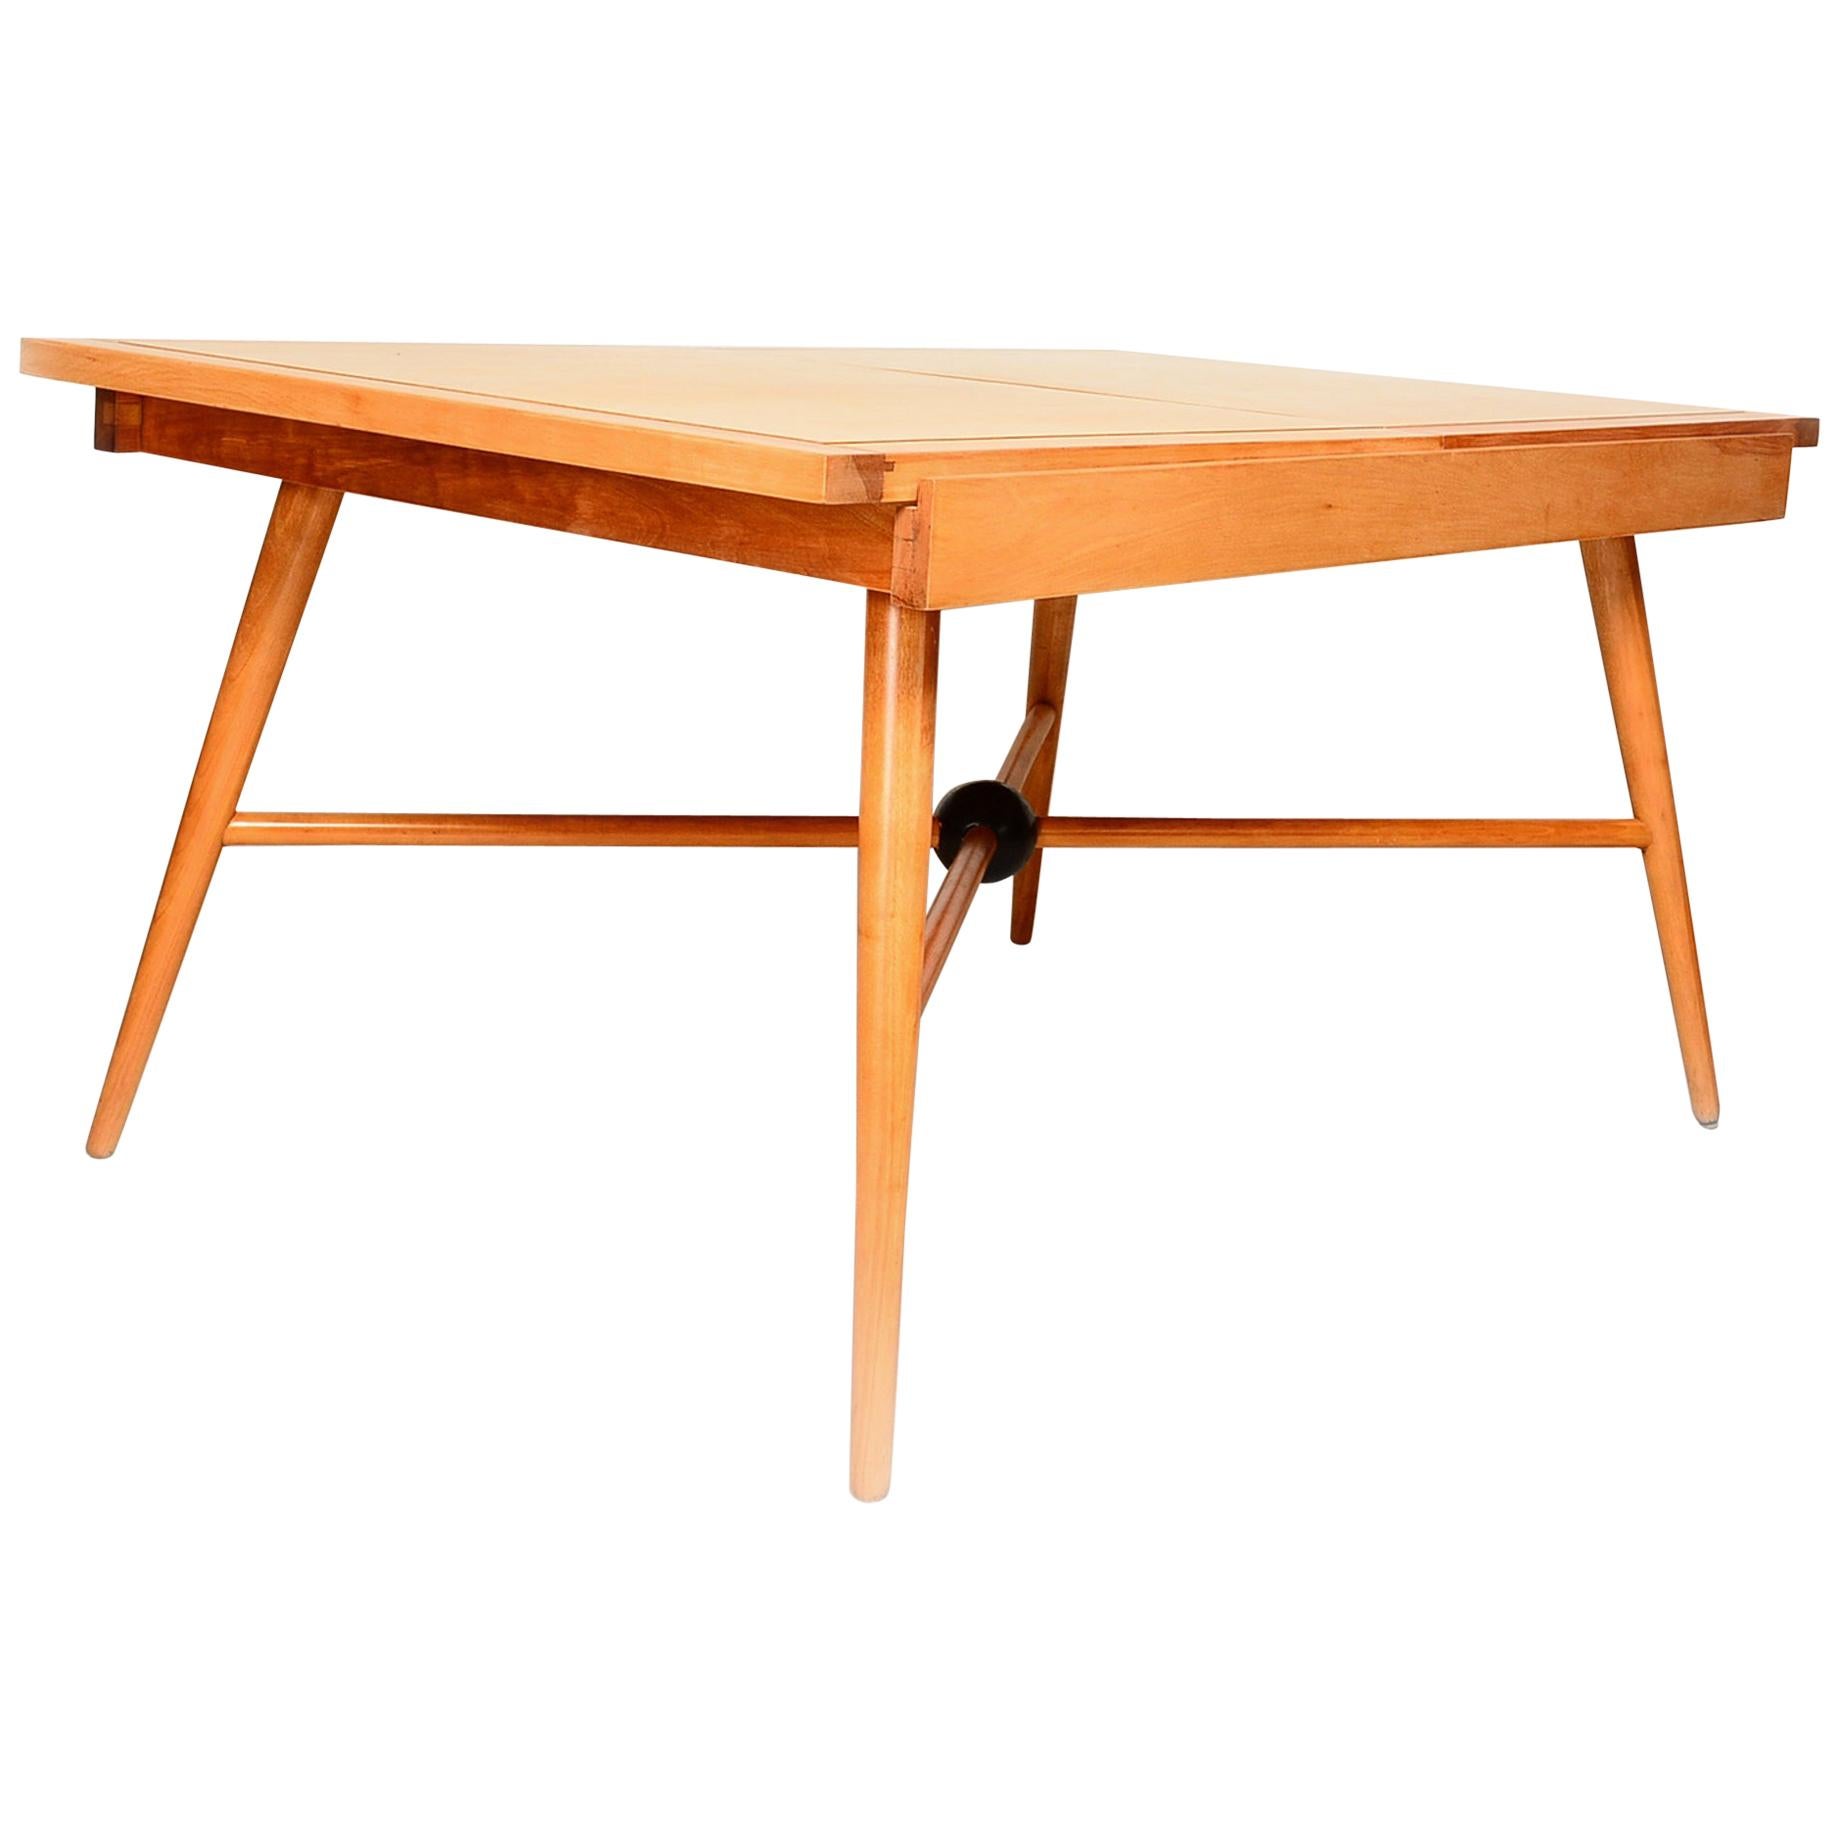 Pleasant Solid Maple Wood Dining Table with Built In Extension USA circa 1950s.
Design linked to Paul McCobb & Planner Group. Table presents with no visible stamp.
Dimensions: 29 in. H x 60 in. W x 39 in. D
Flared tapered legs skewed angle with